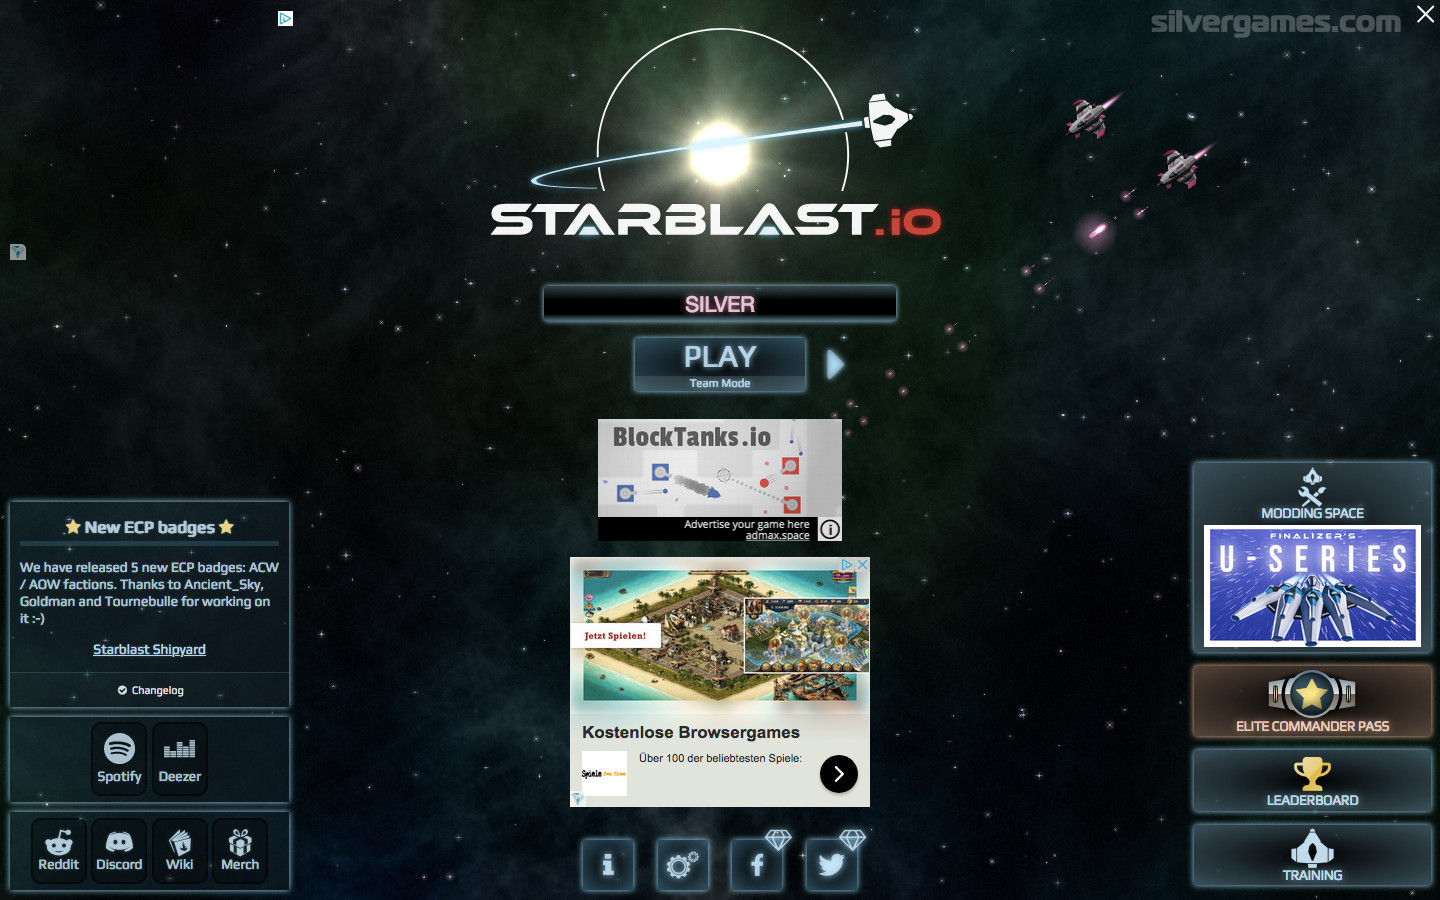 Starblast.io part 2 - How to play and get a free ecp and game play